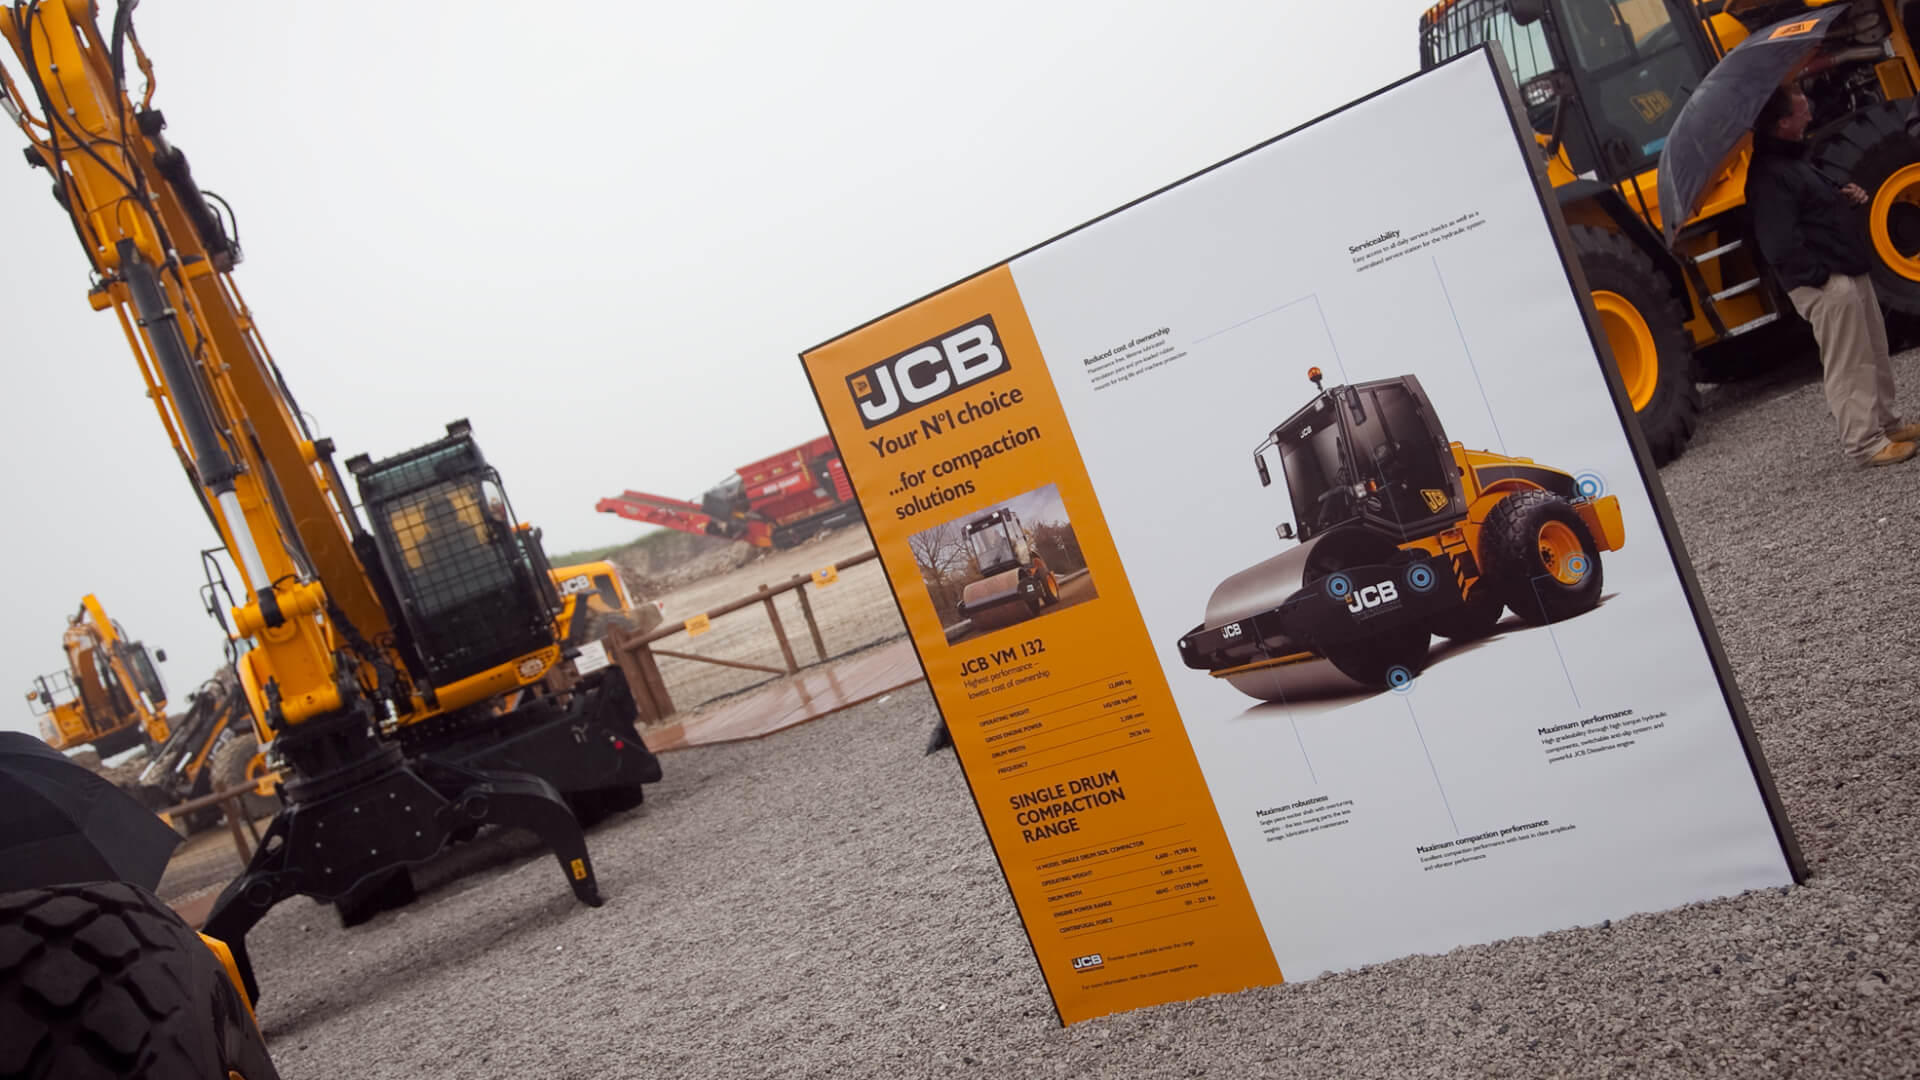 jcb machinery outside with an informative sign